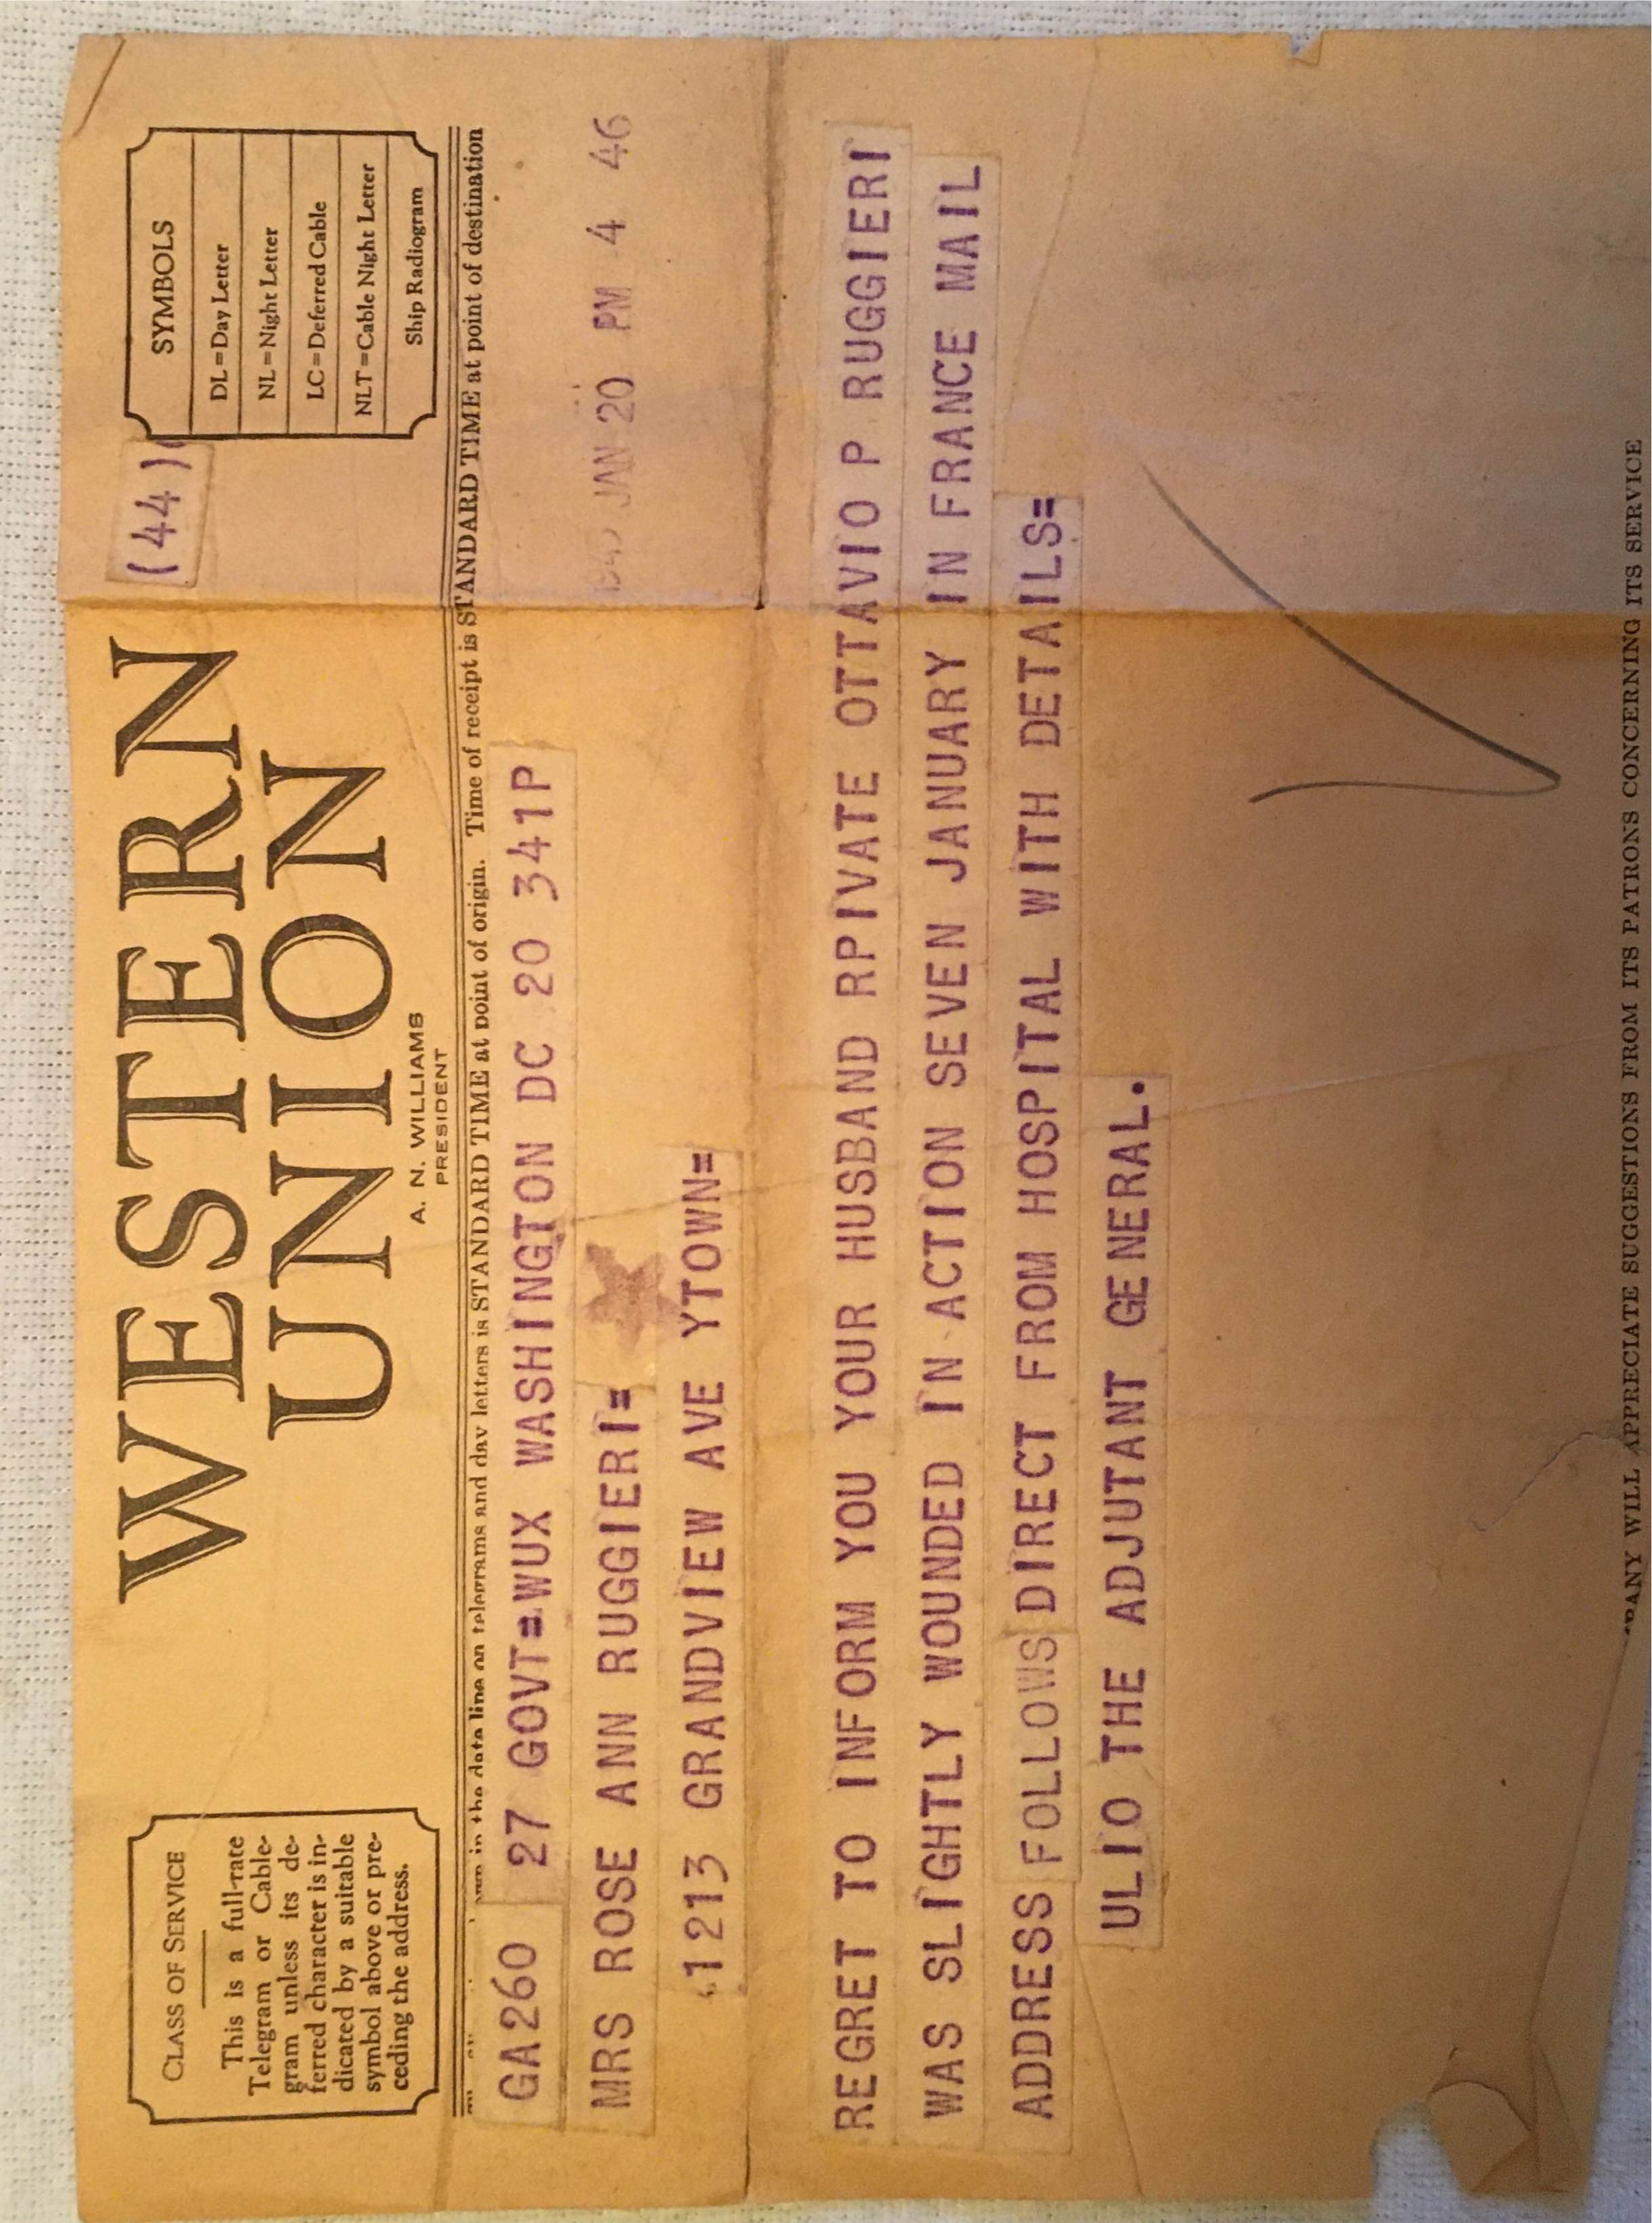 A telegram from 1946, sent to the family of Private Ottavio Ruggieri, wounded in action. 